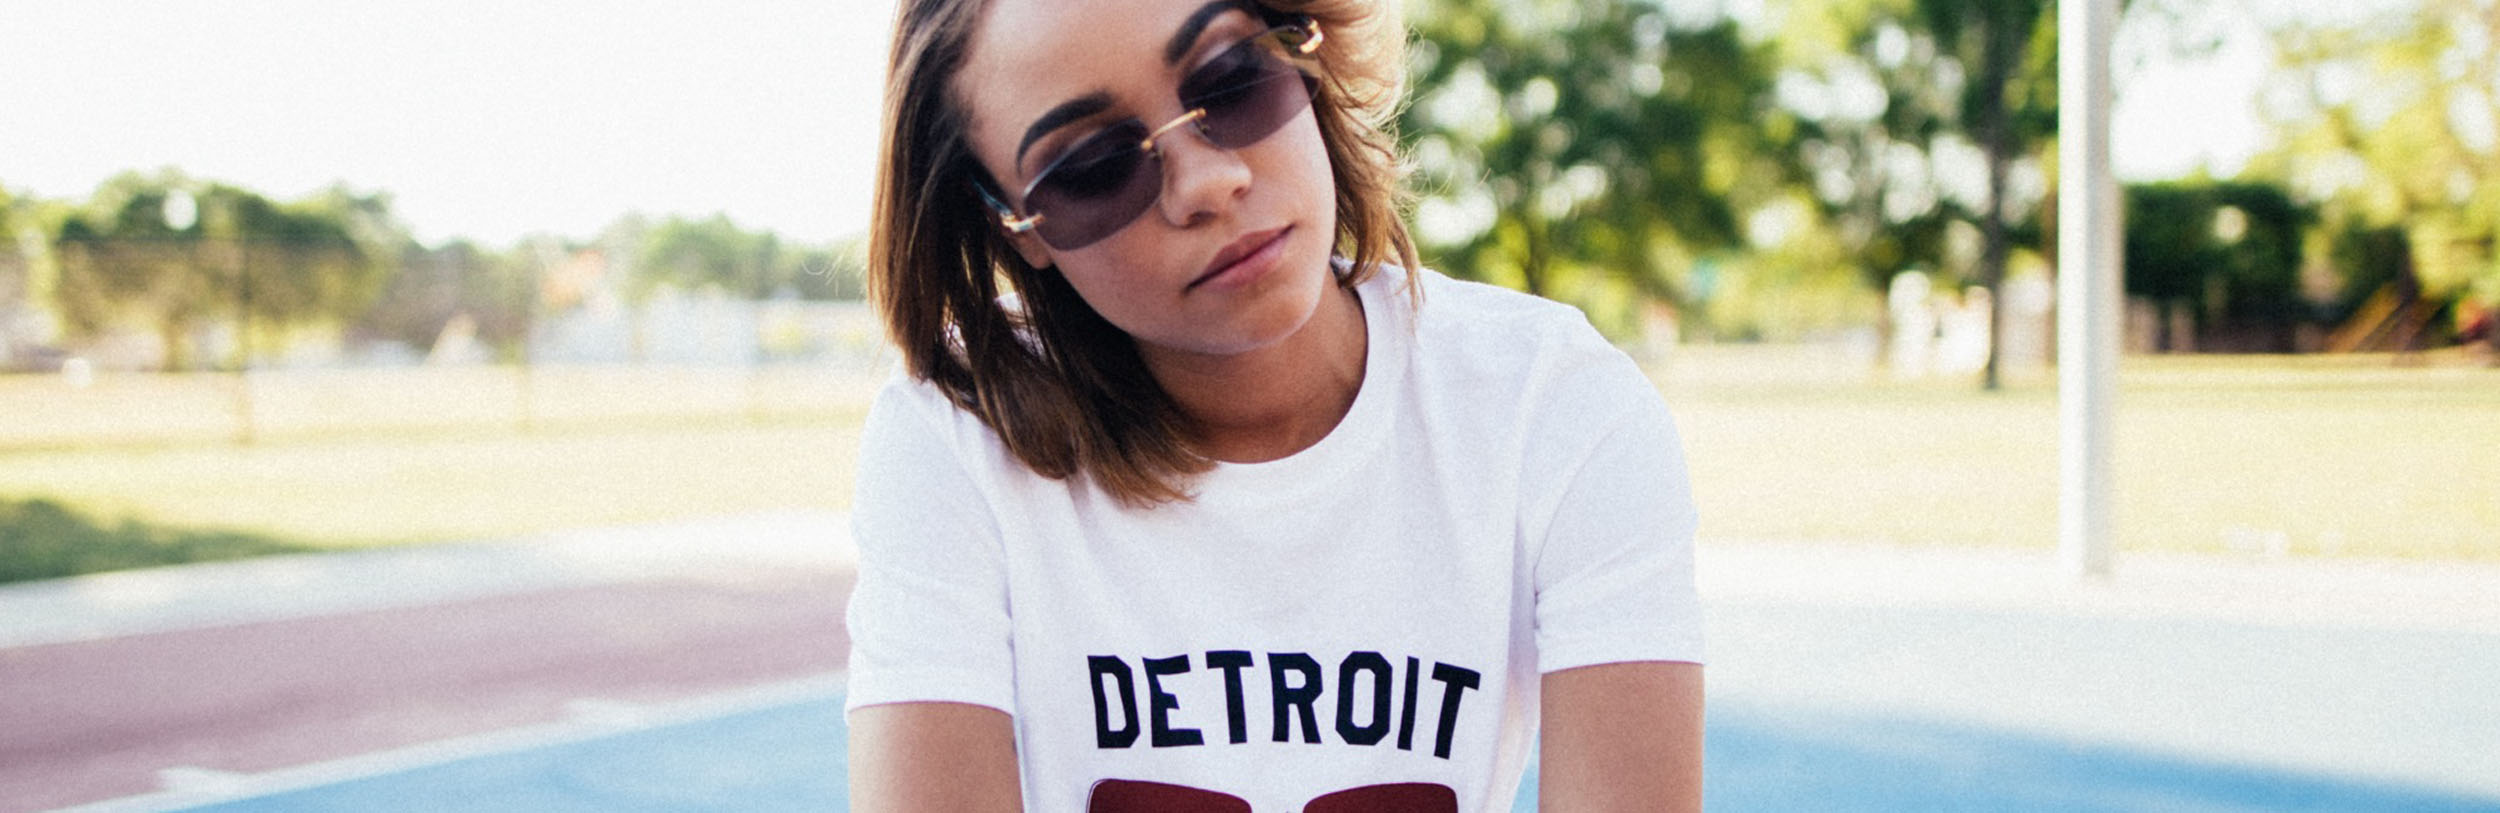 where can i buy cartier glasses in detroit